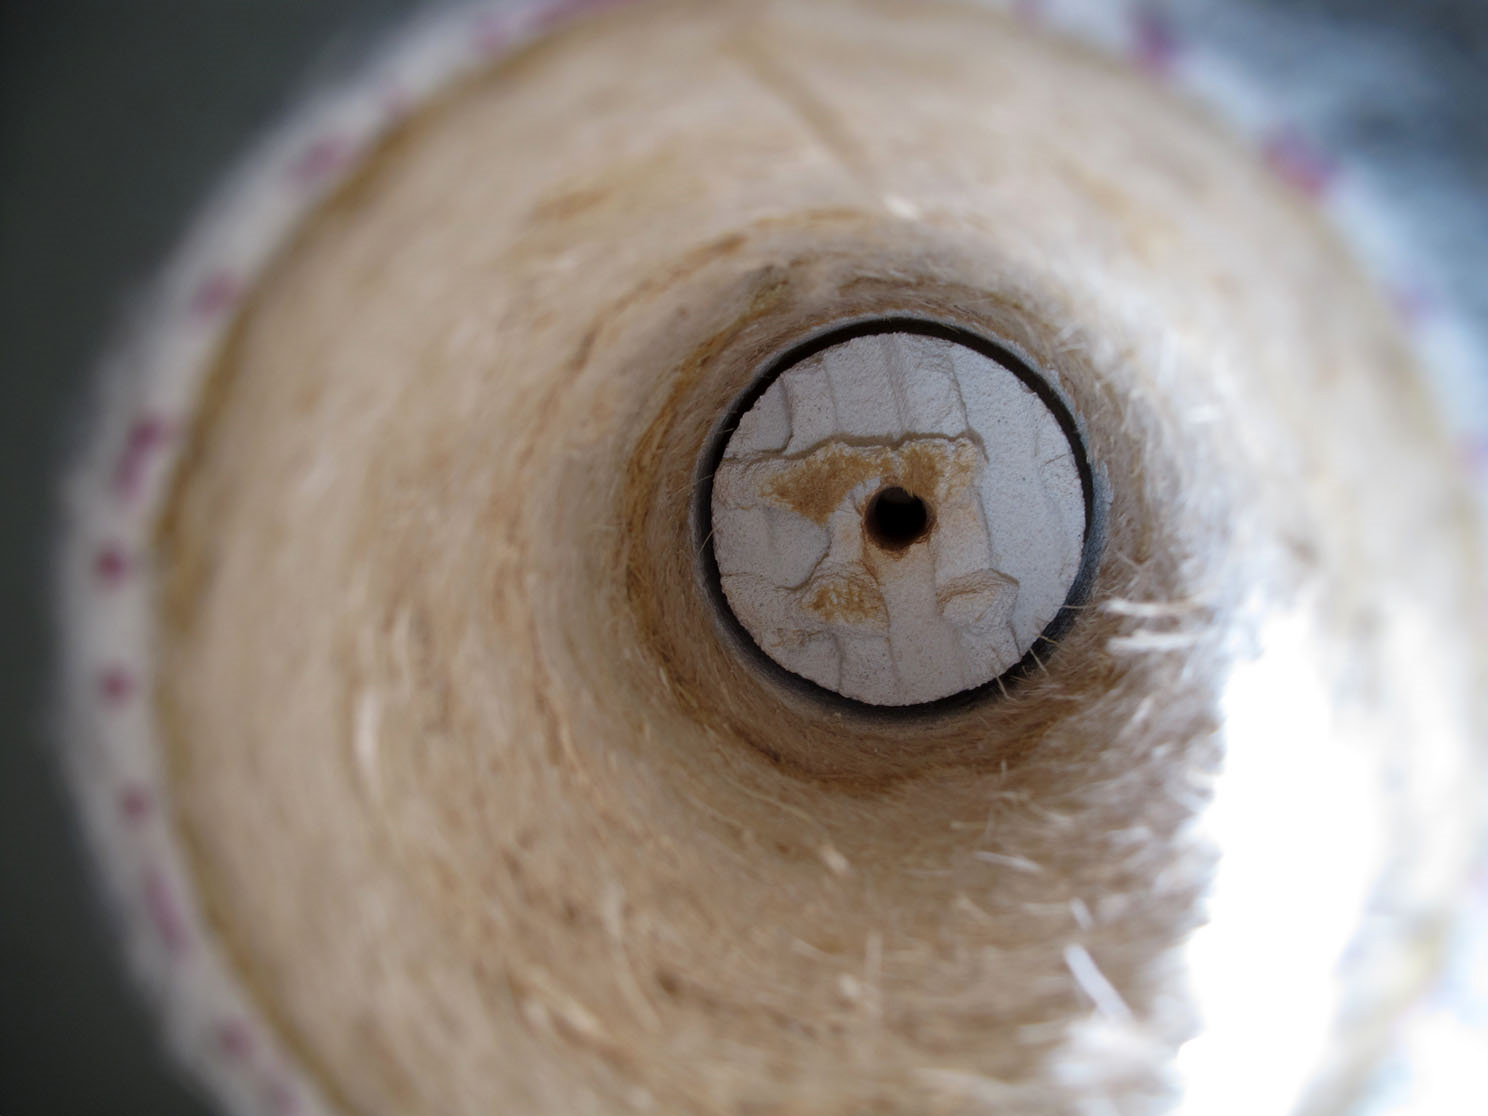 A core drilled through wood fibre insulation.